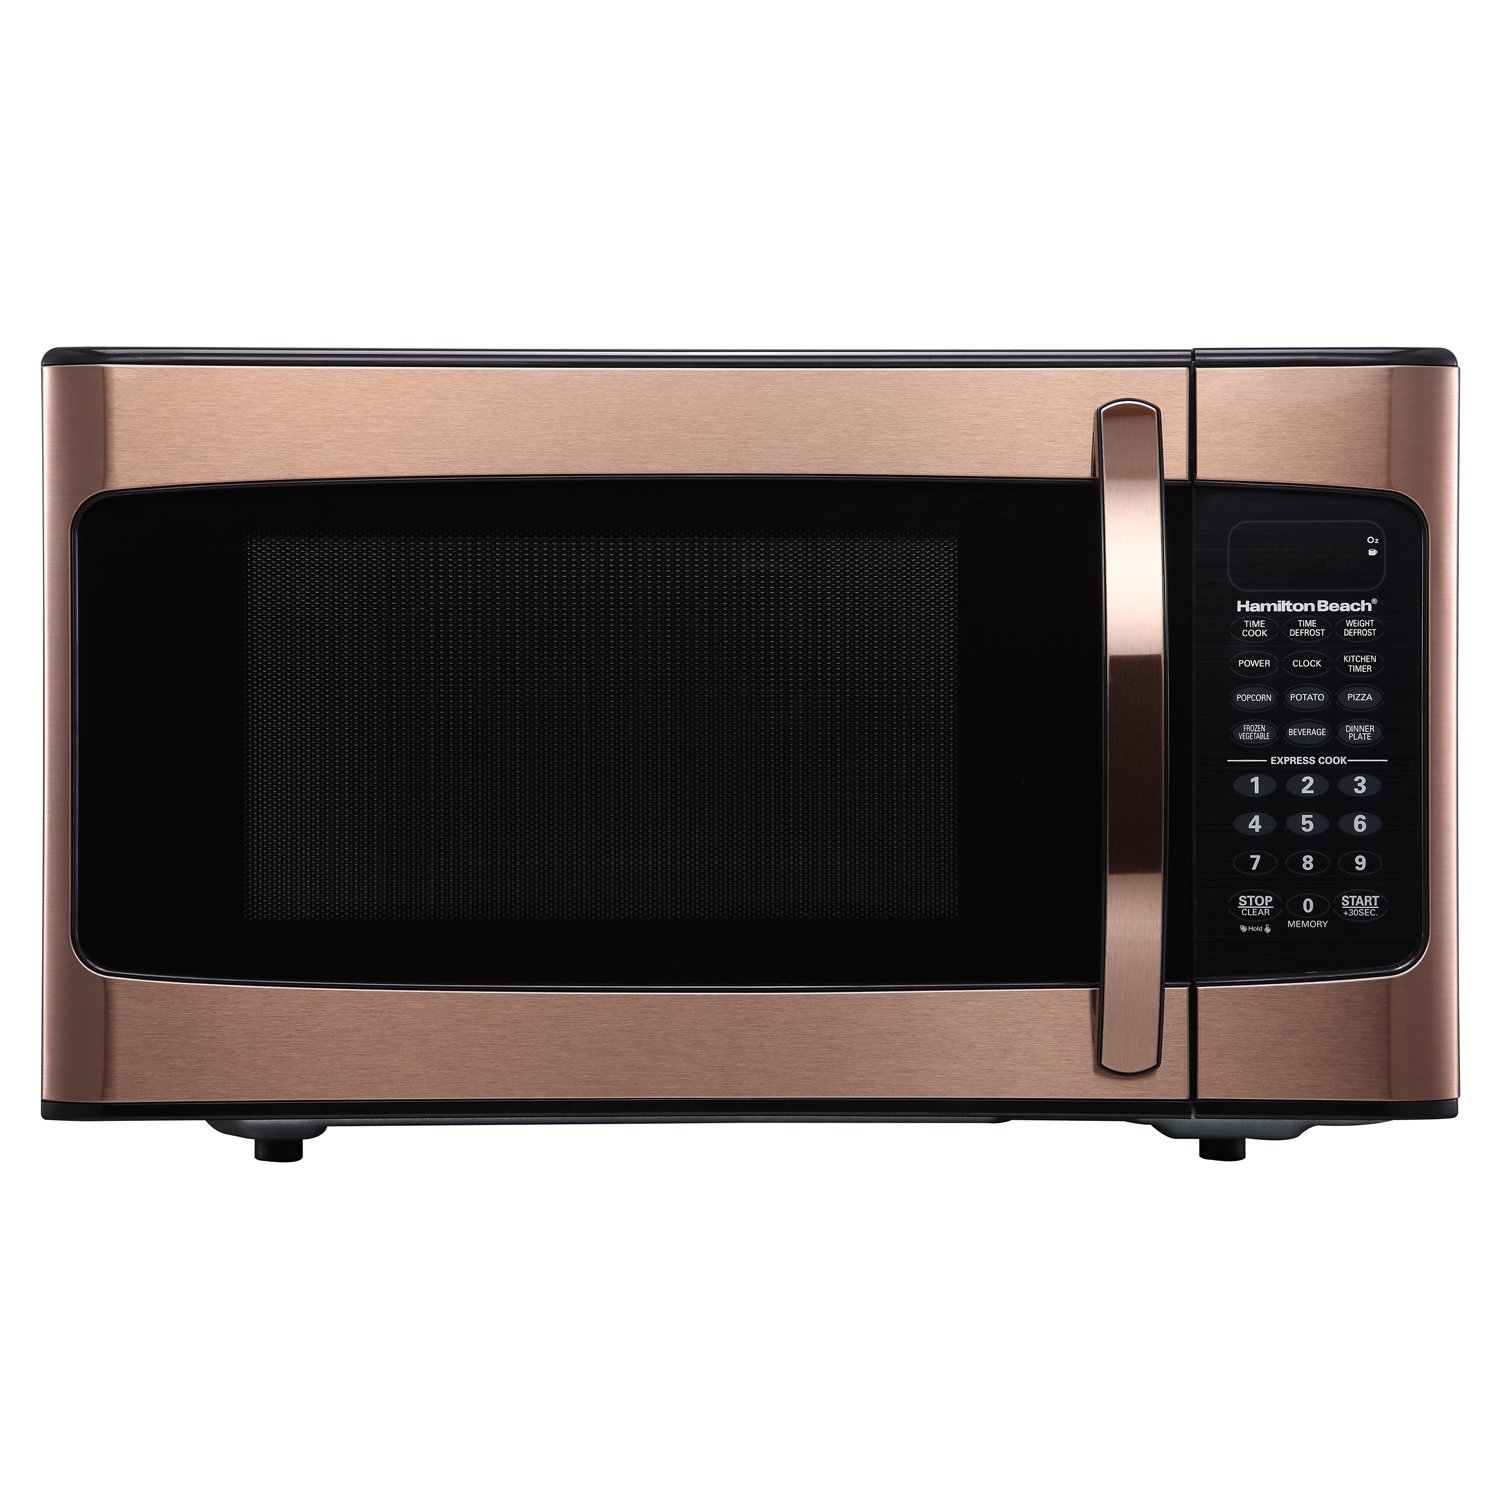 HB 1.1 Cubic Foot Copper Finish Microwave